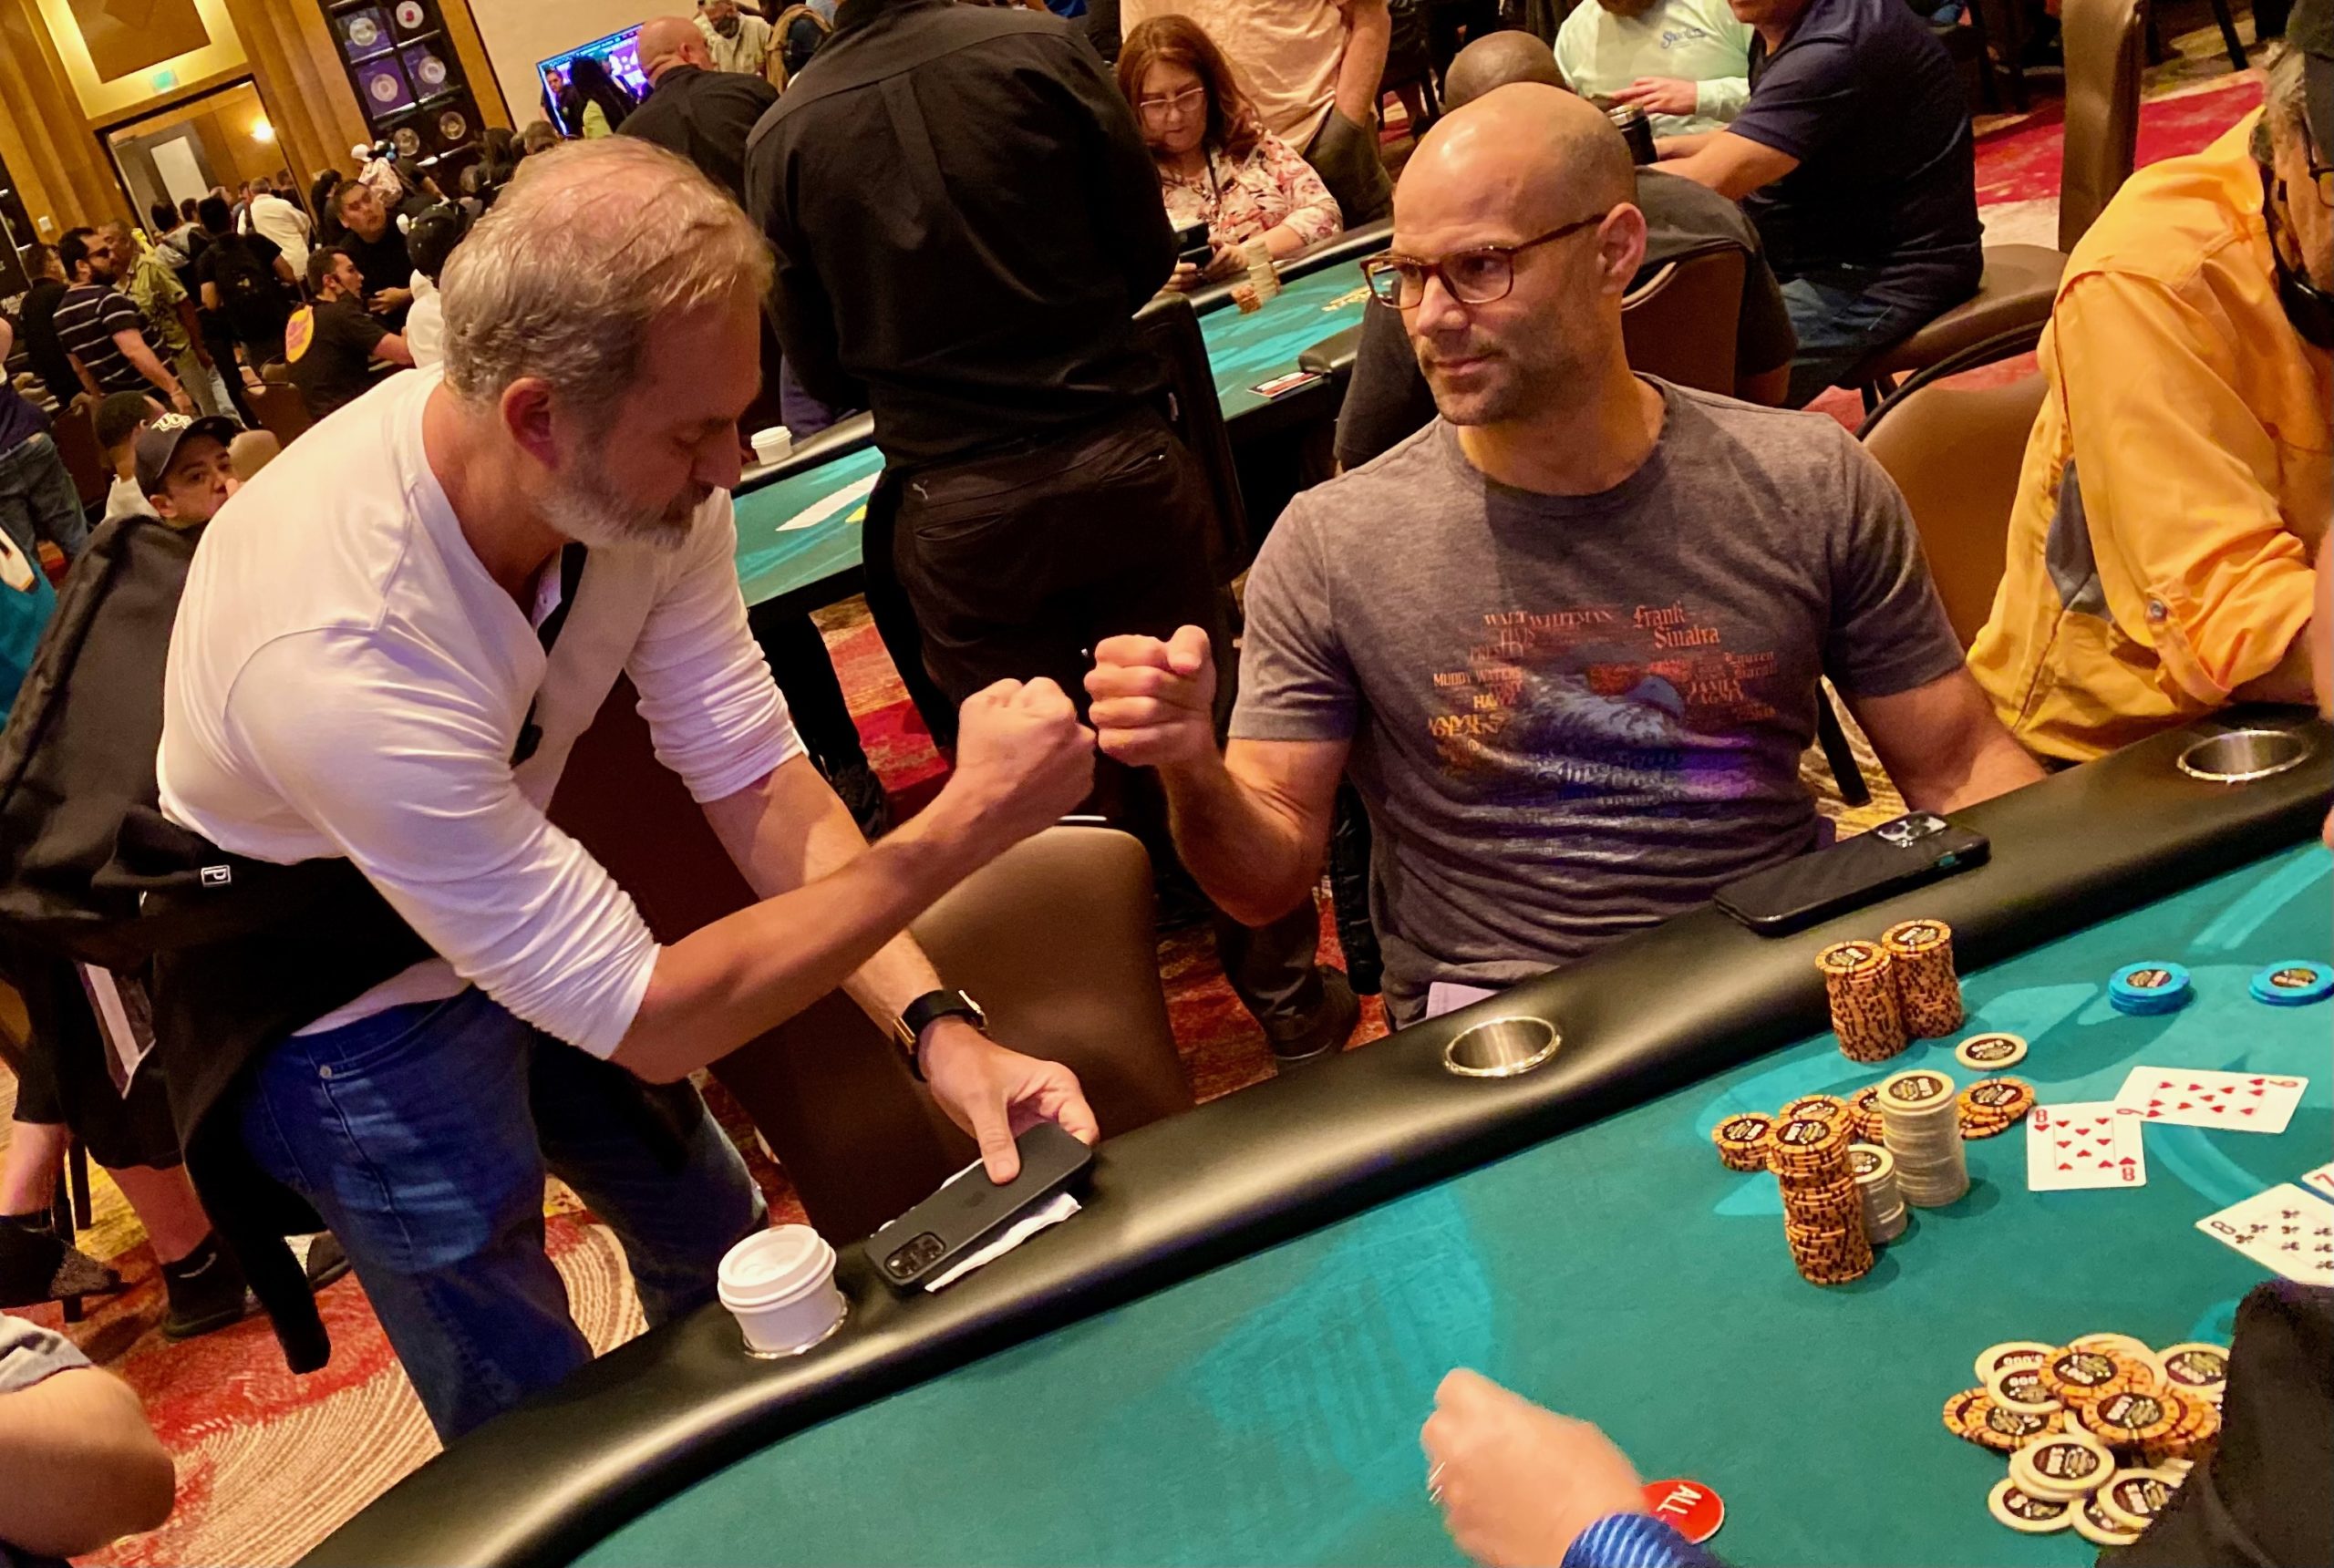 Chad Lipton Knocks Out a Player on the Money Bubble